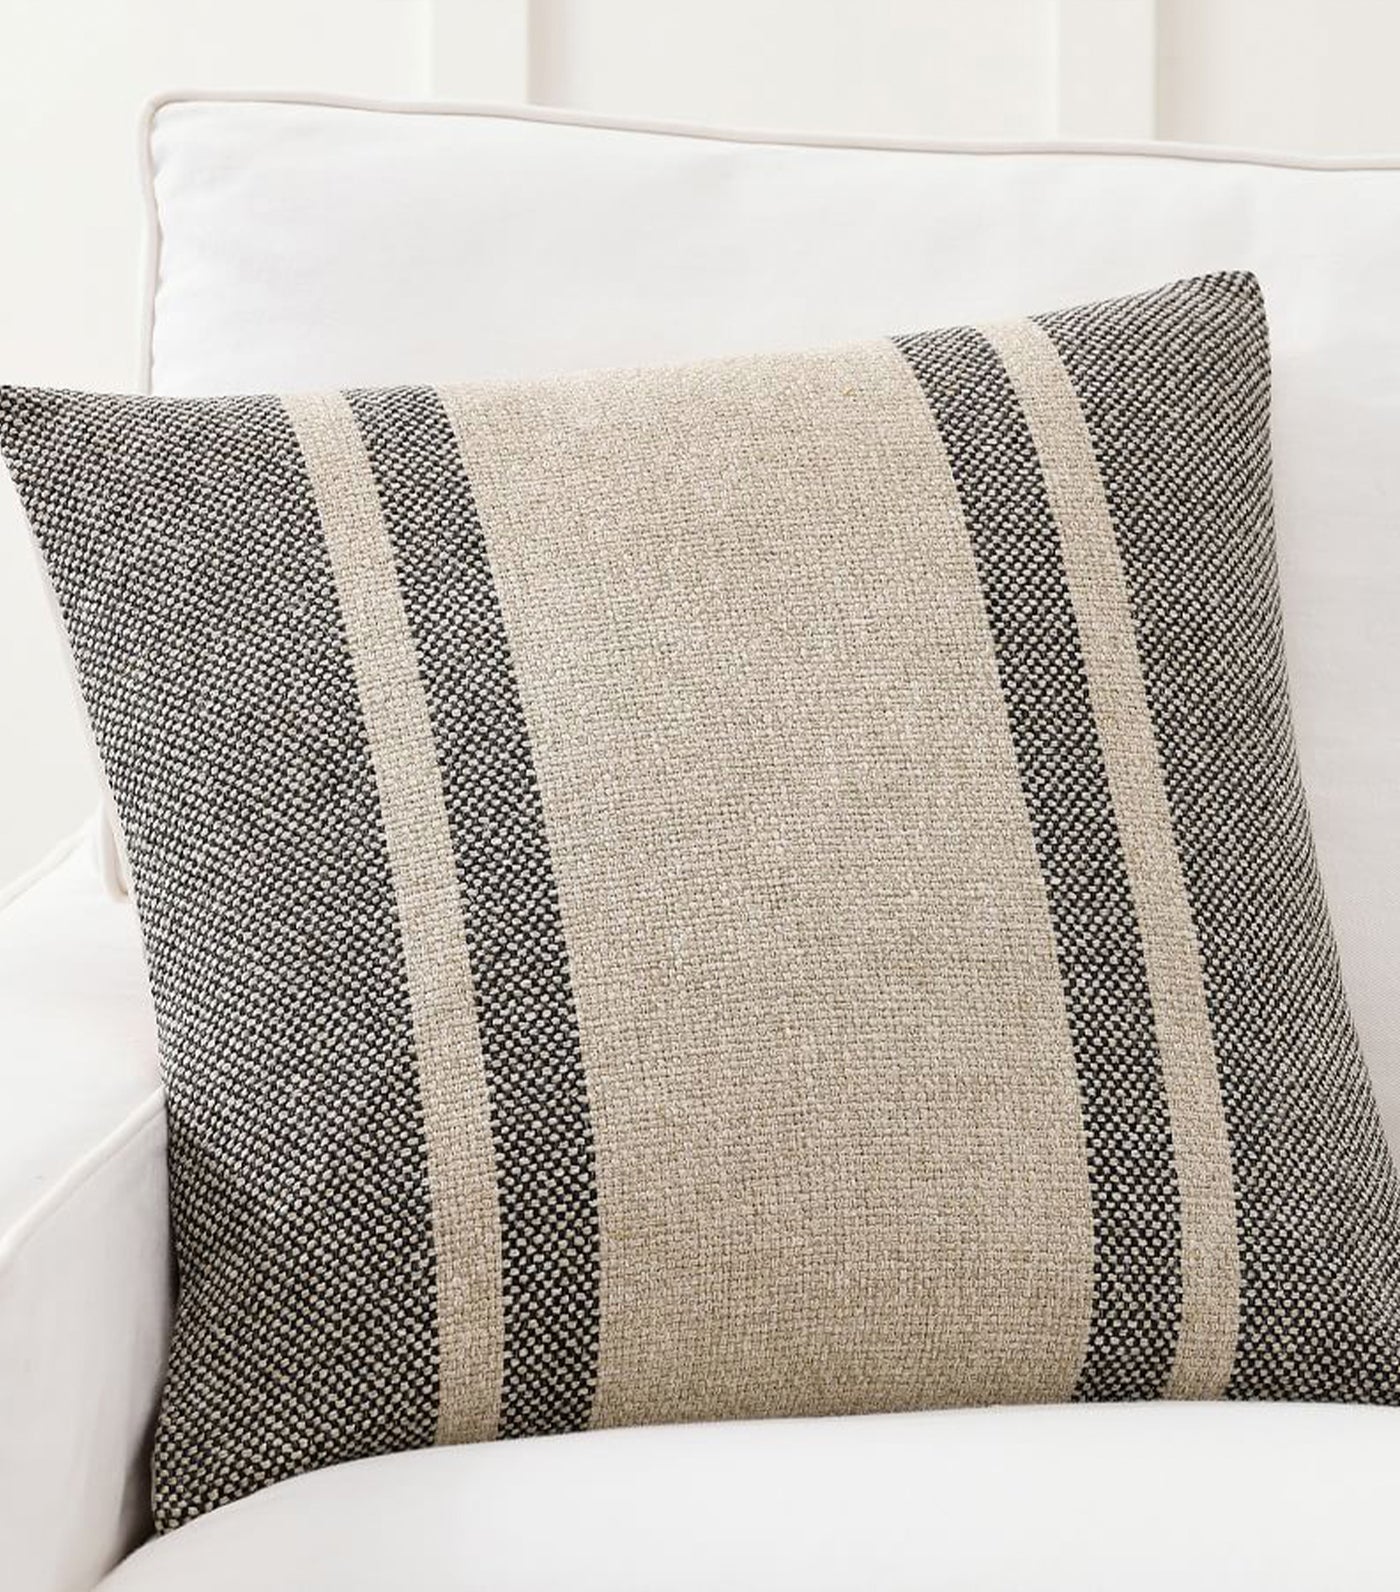 Pottery Barn Blaine Striped Pillow Cover